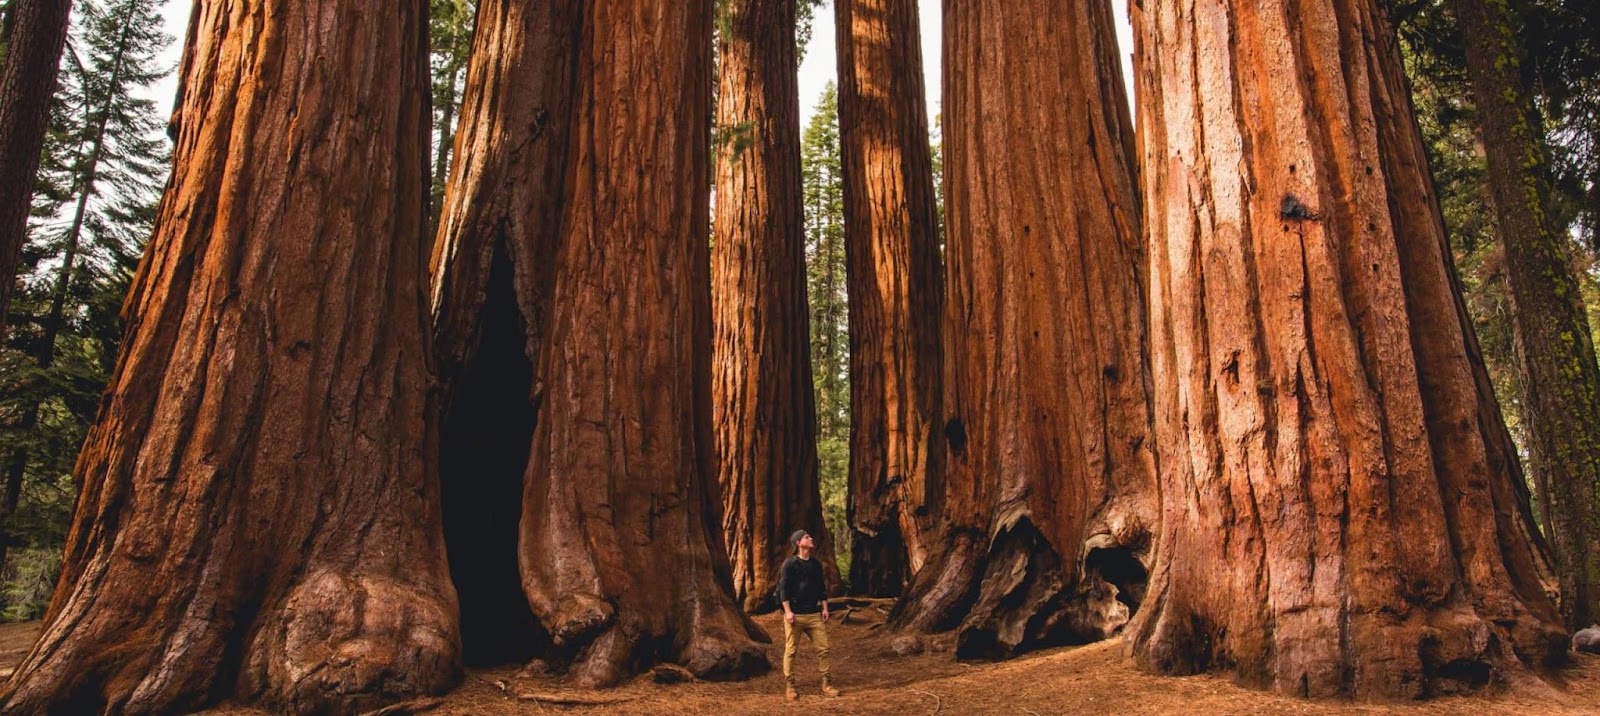 What Airport Is Closest To Sequoia National Park